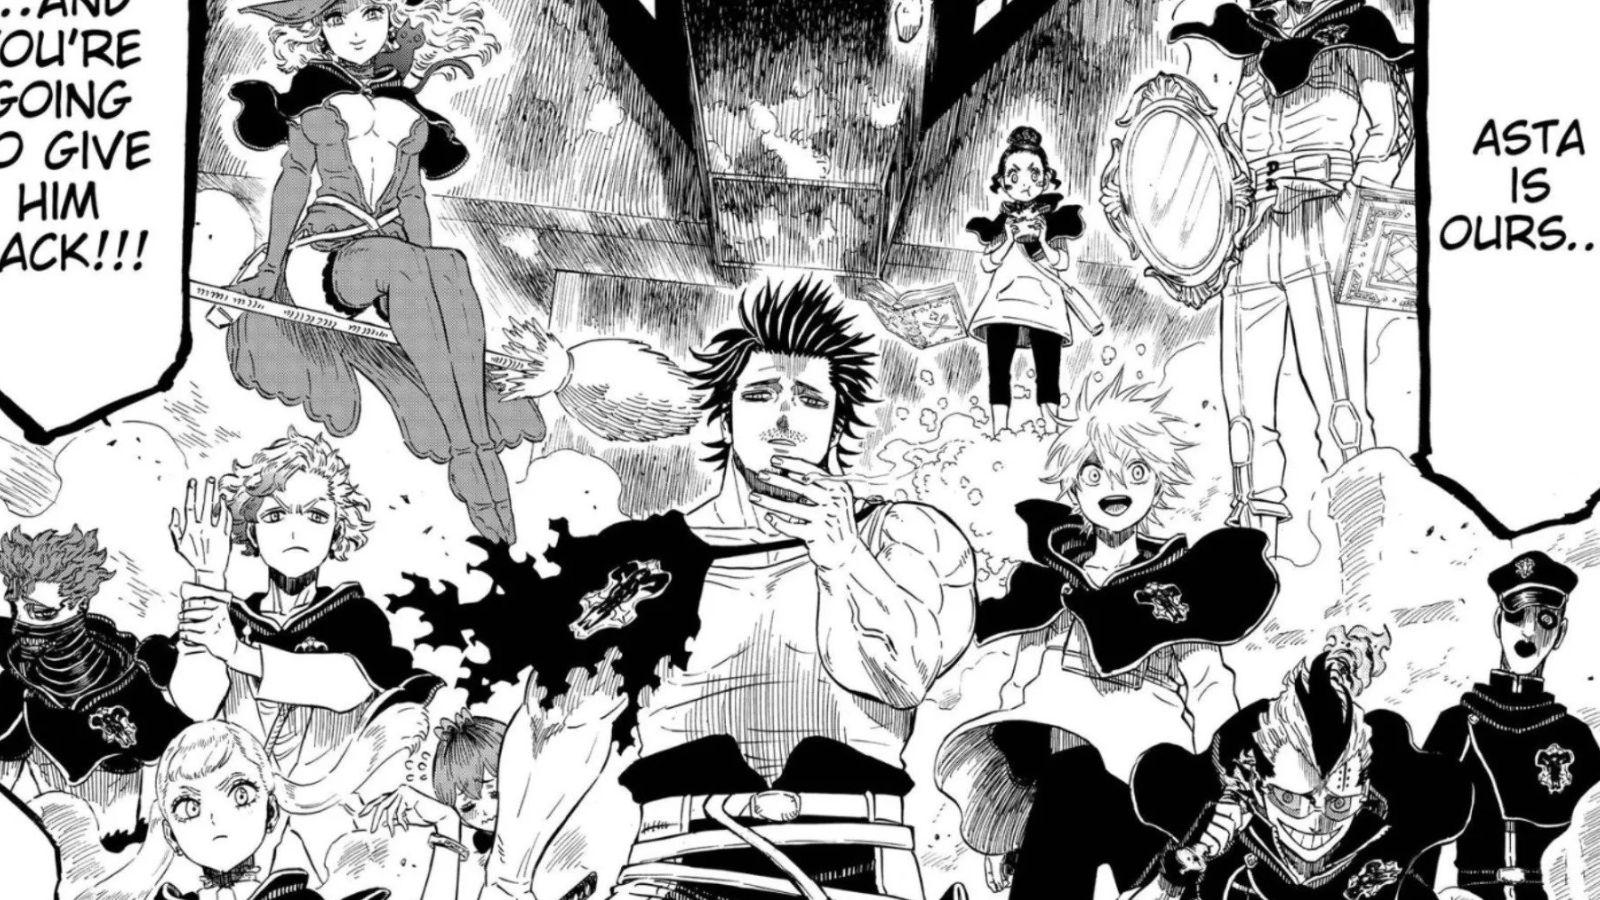 A panel from Black Clover